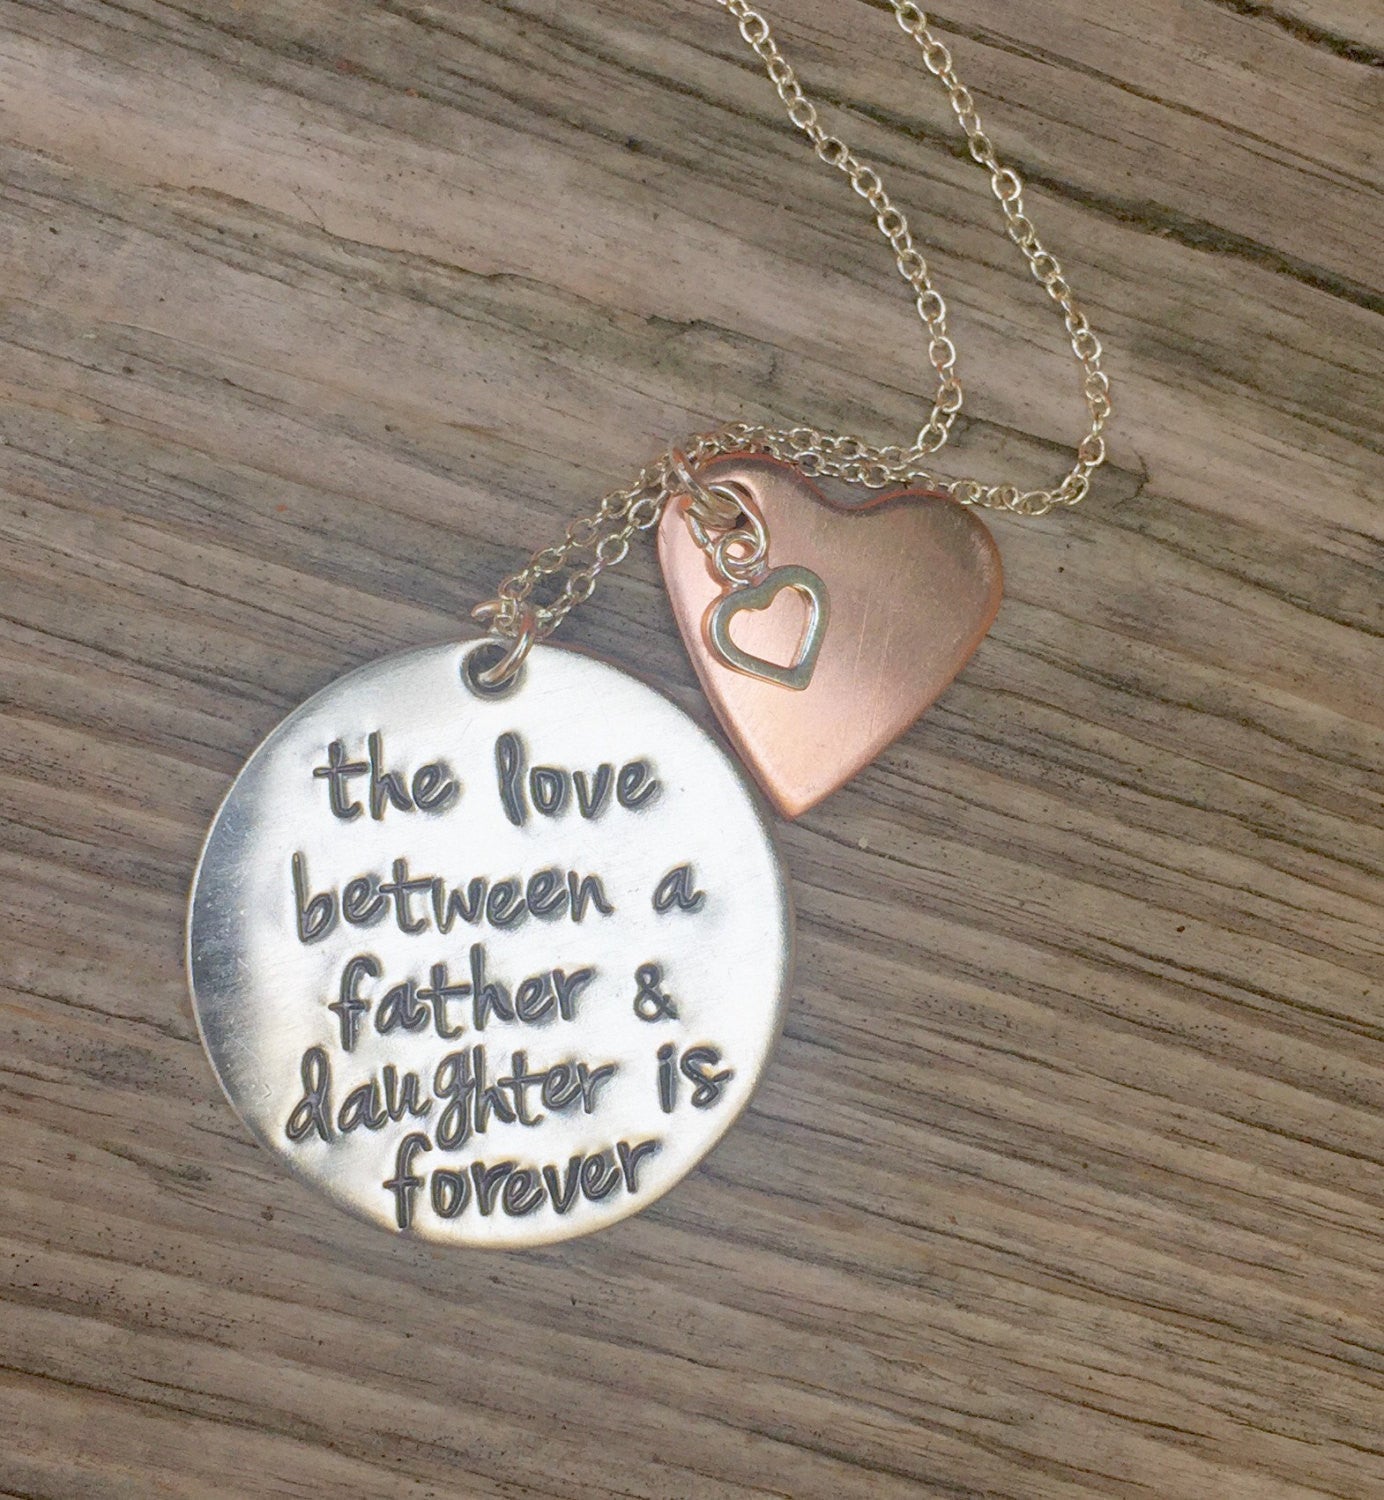 The Love Between A Father and Daughter is Forever Necklace - Natashaaloha, jewelry, bracelets, necklace, keychains, fishing lures, gifts for men, charms, personalized, 